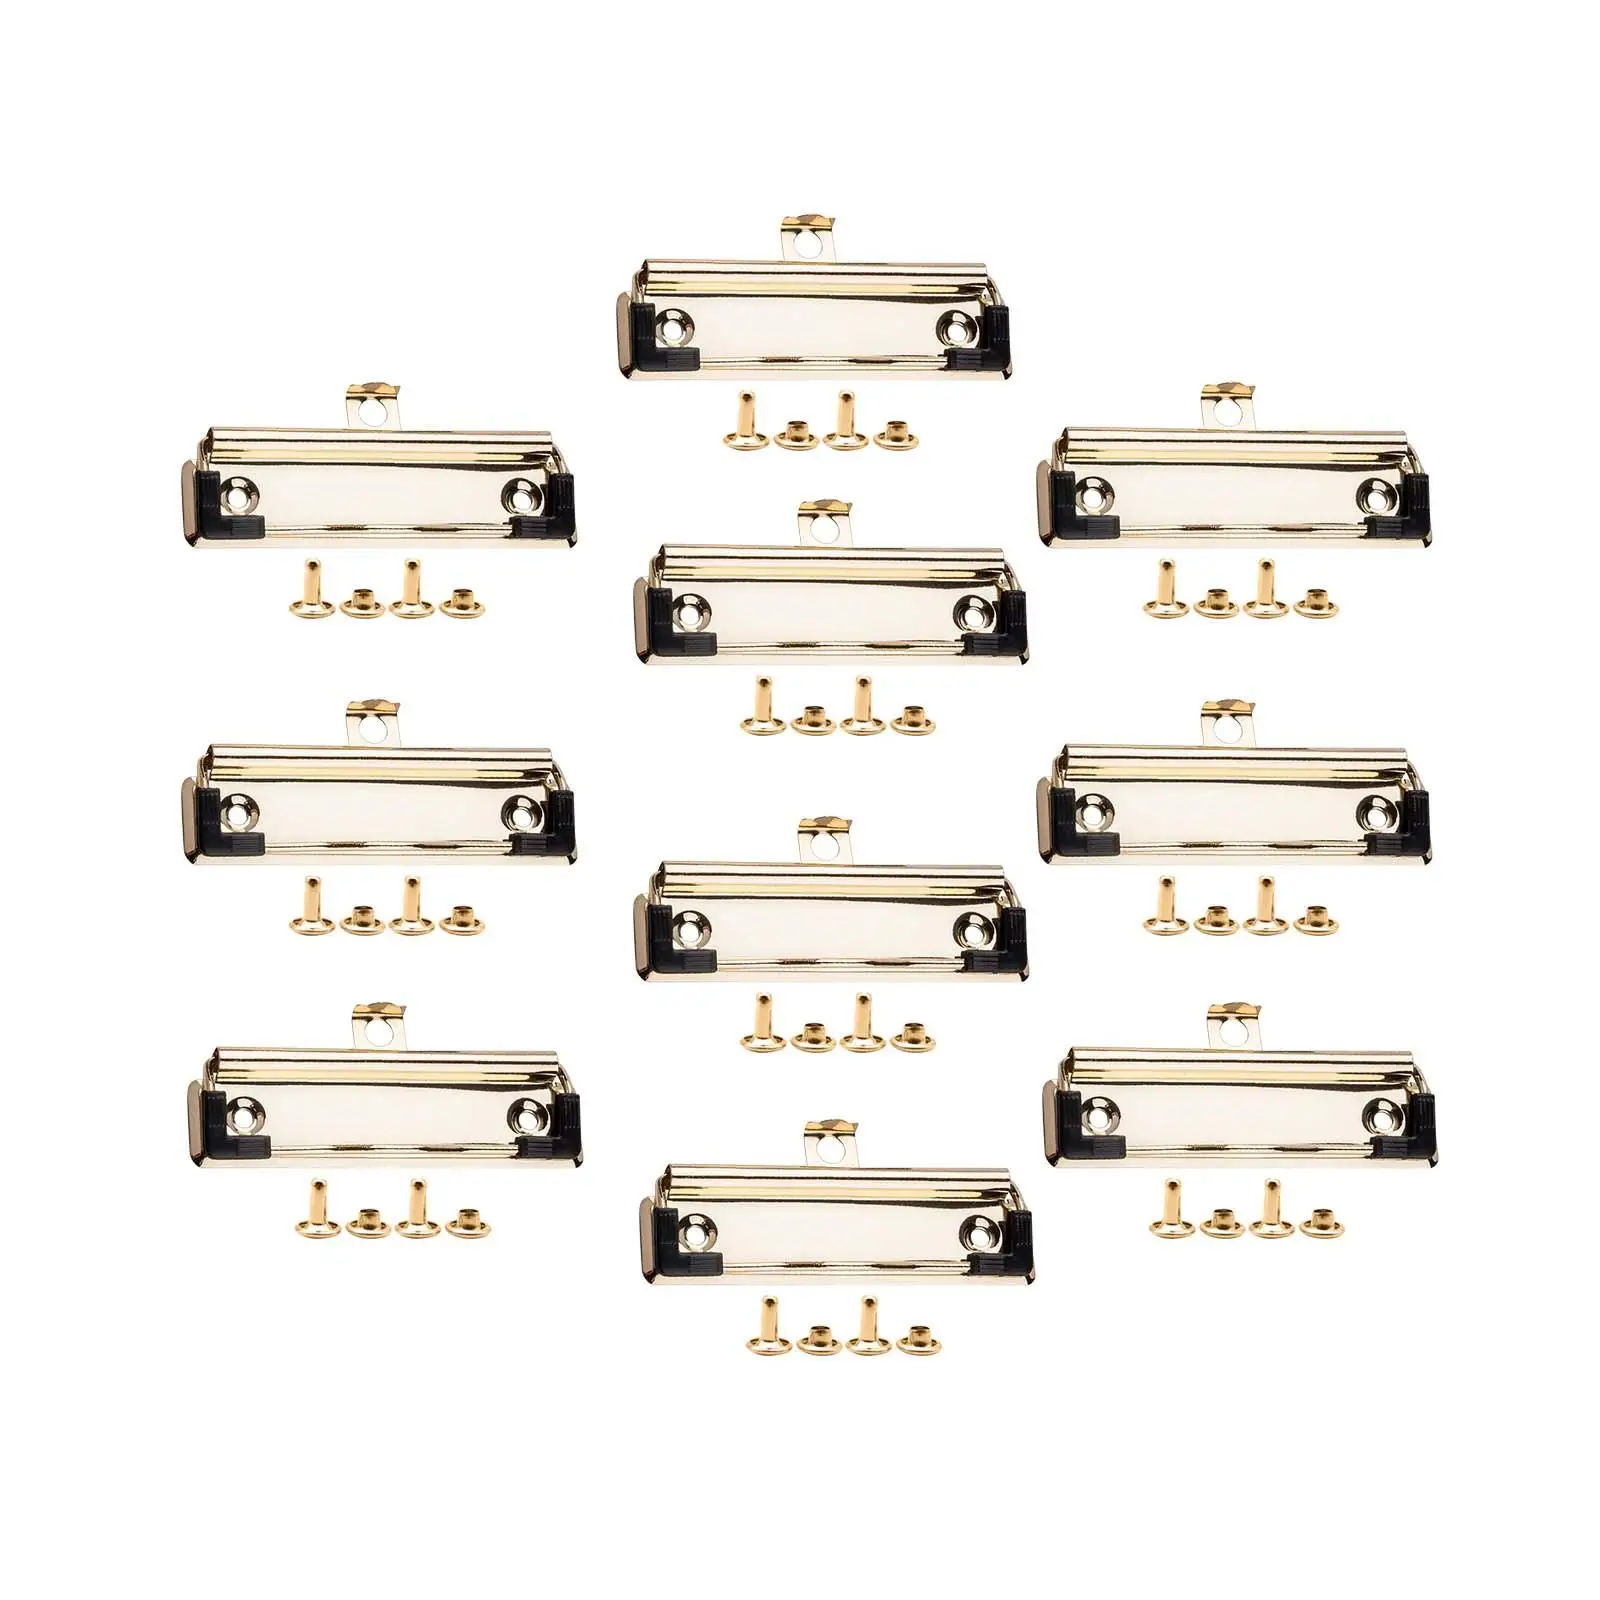 10x Small Clipboard Clips Hardware Mountable with Rubber Feet Lightweight Hanging Hole Hardboard Clips Document File Board Clips